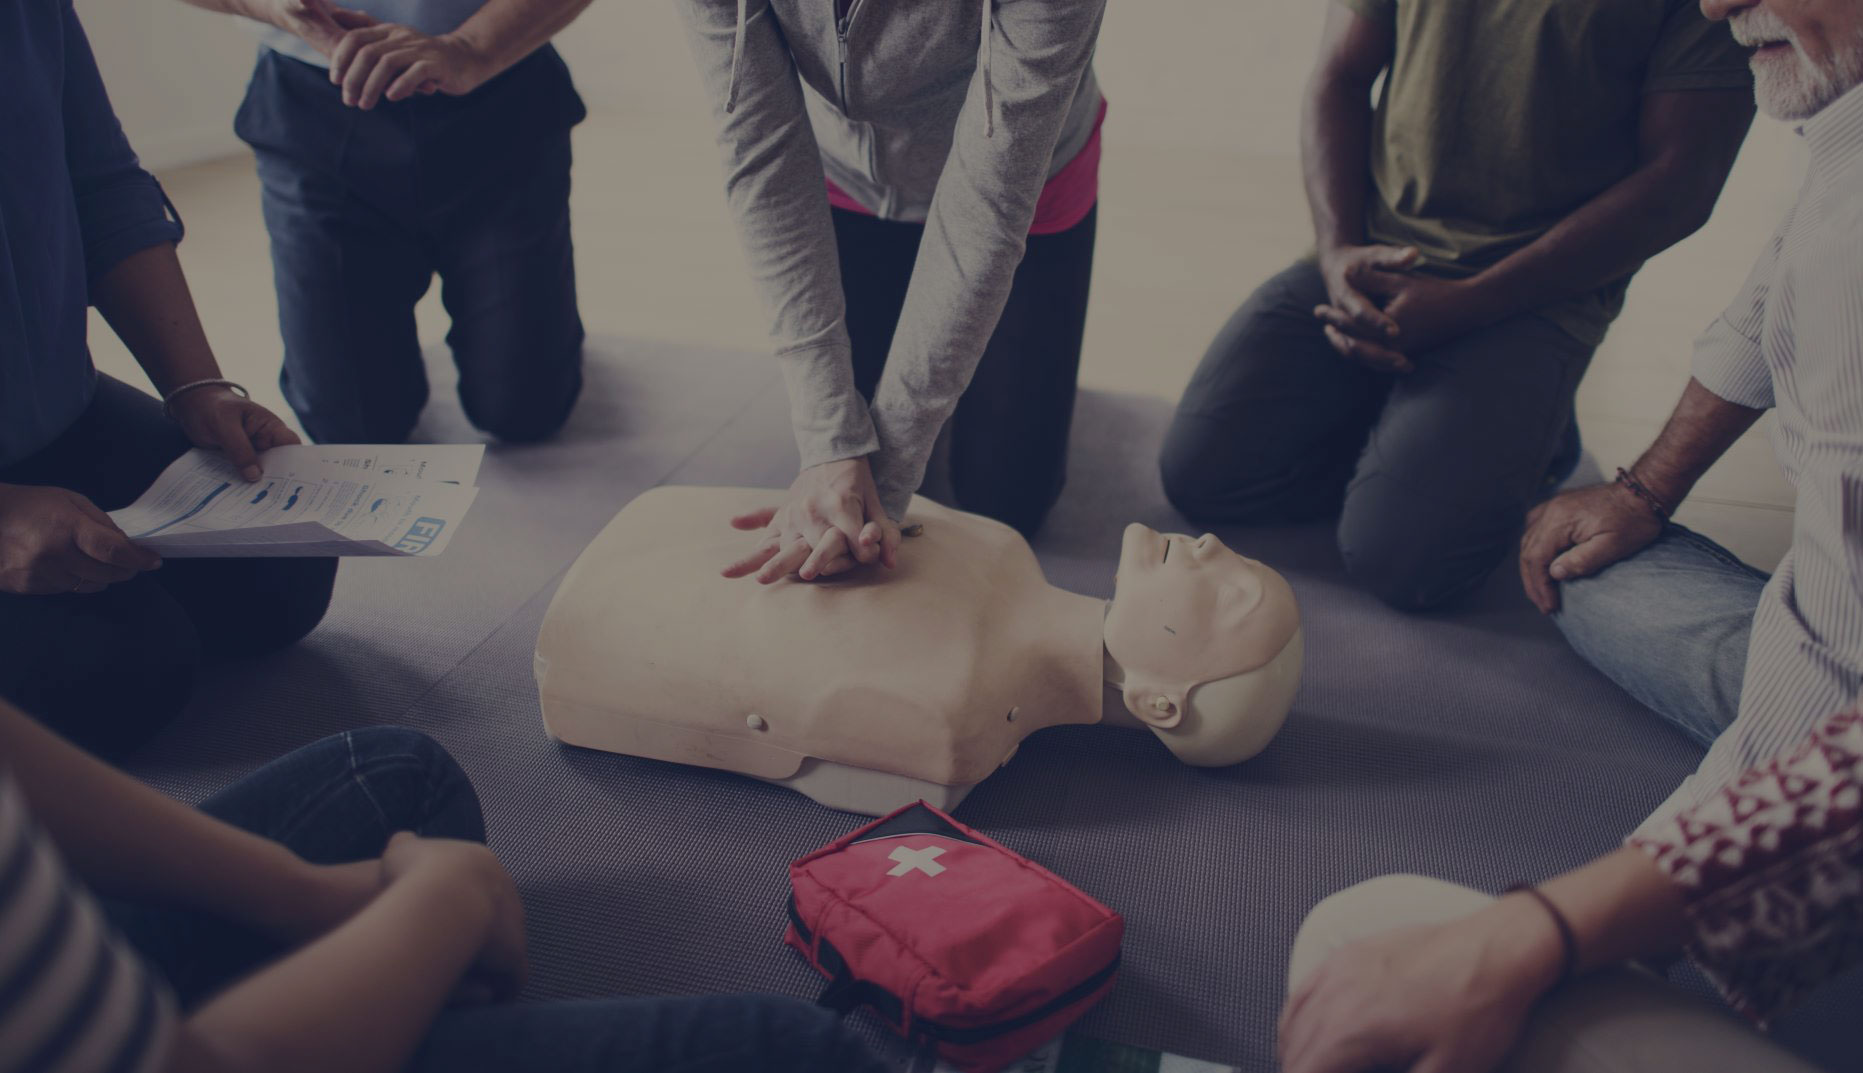 CPR Training and Certification in Chicago